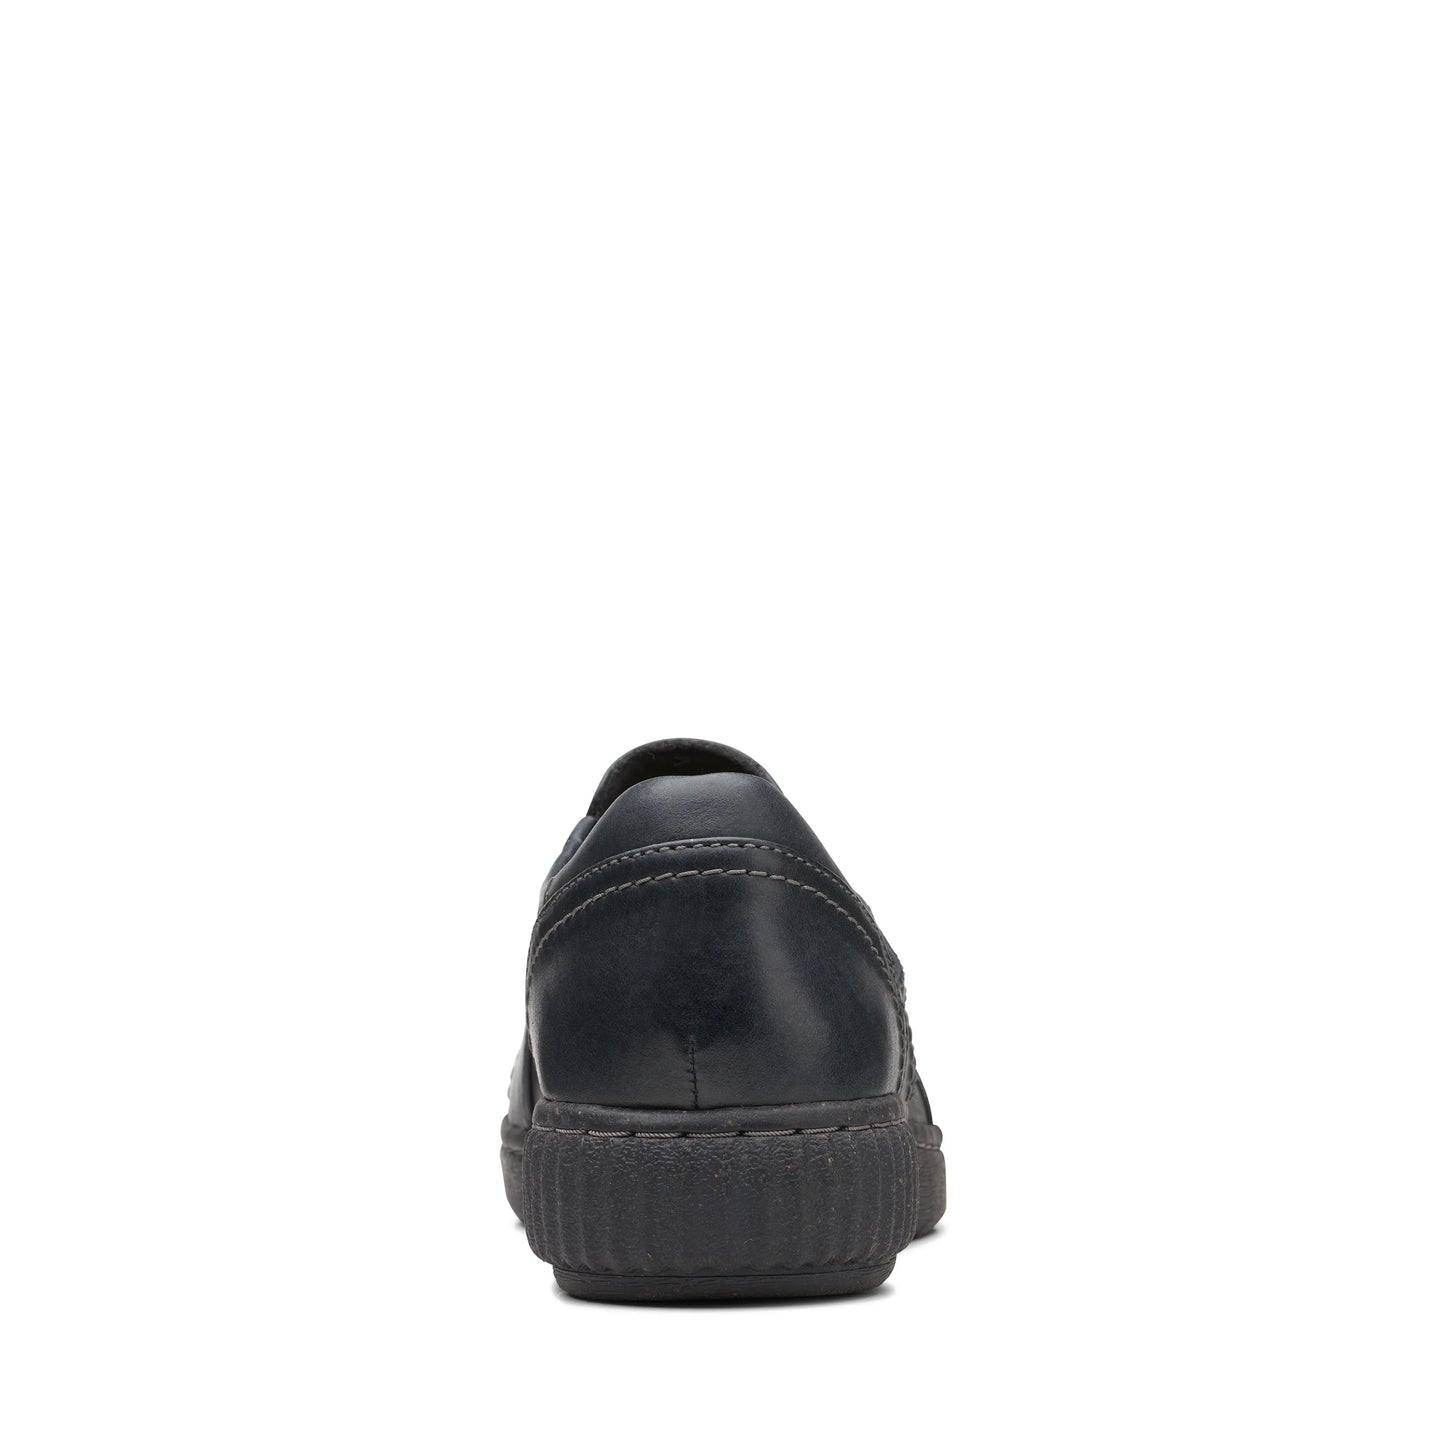 CLARKS | ZAPATOS SIN CORDONES ON SHOES MUJER | CAROLINE PEARL BLACK LEATHER | NEGRO